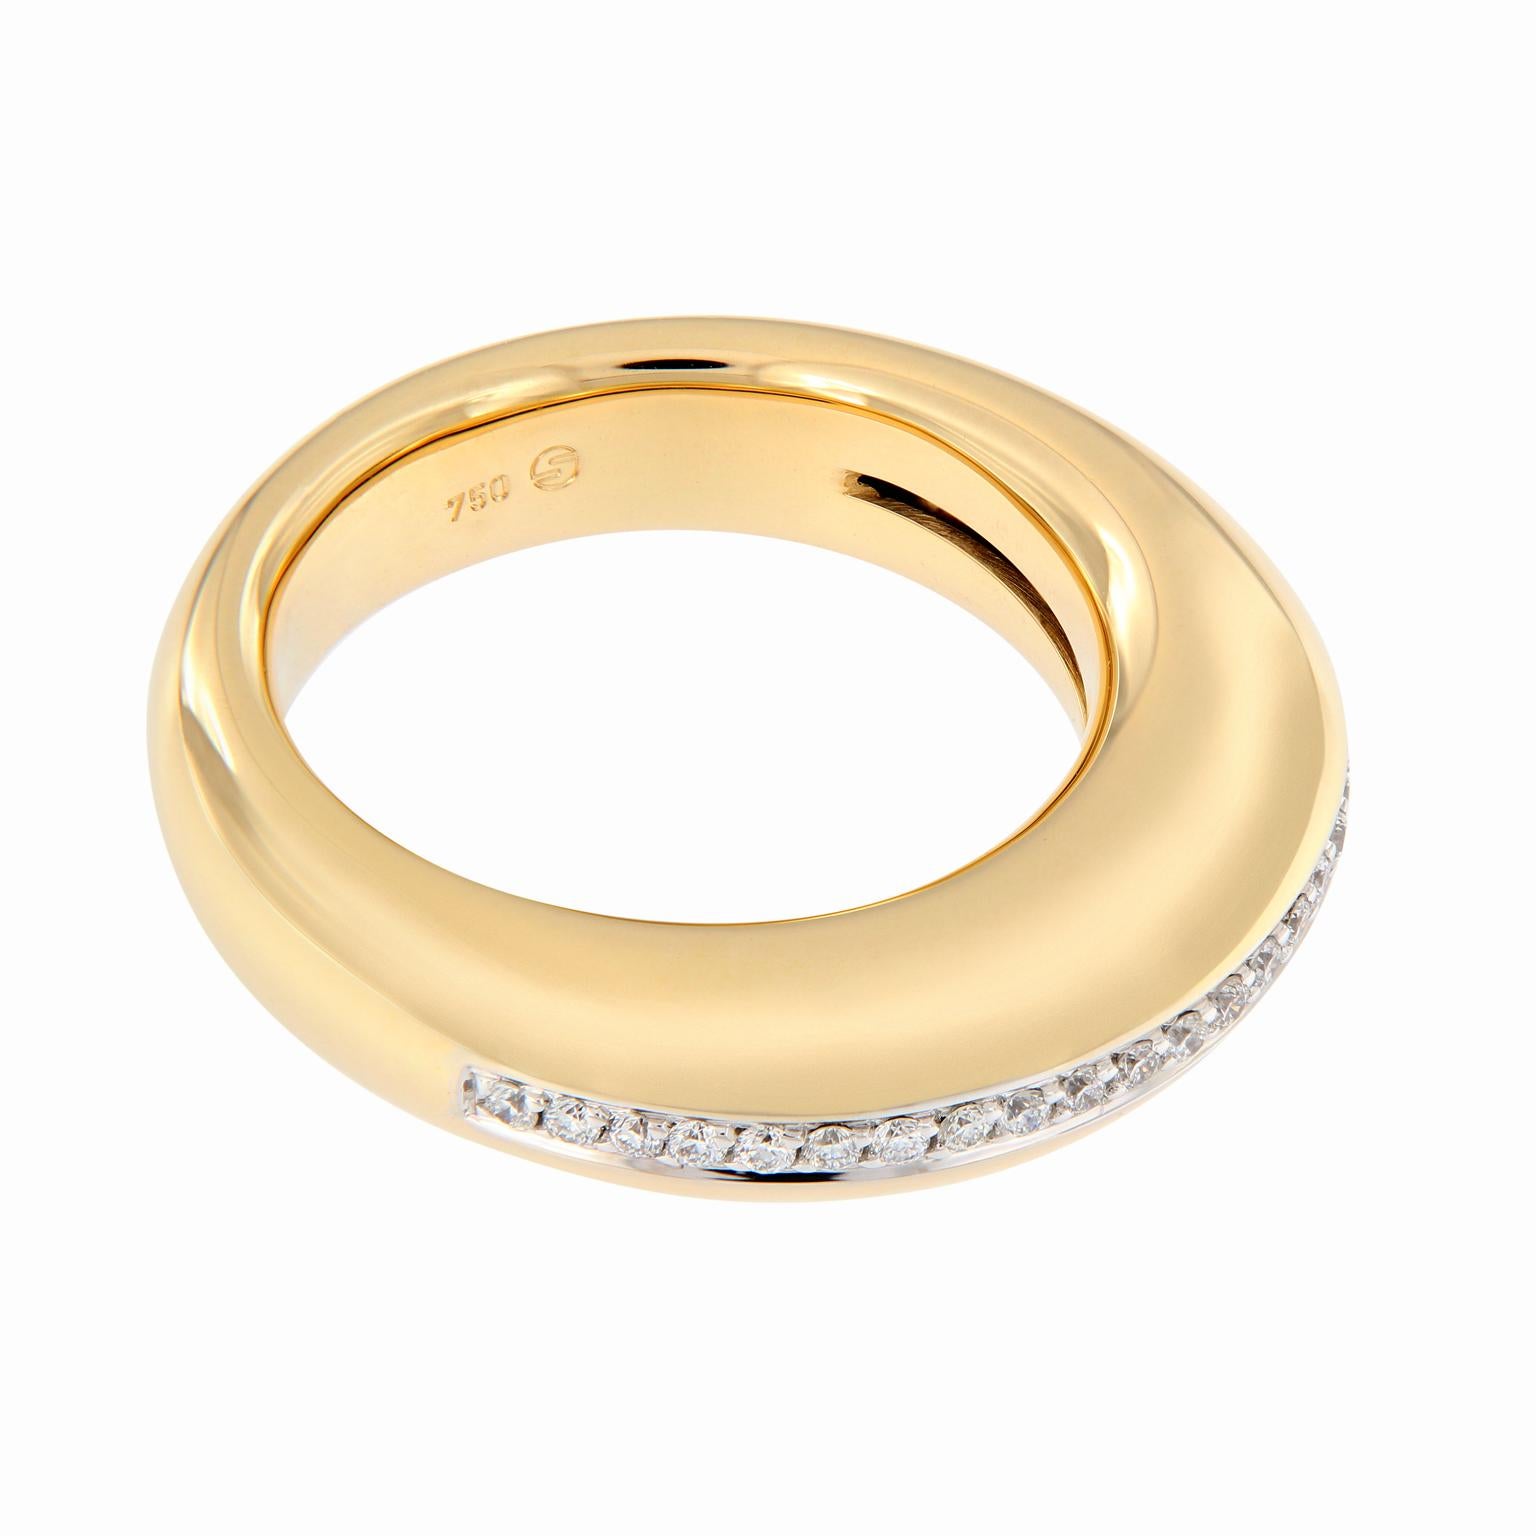 This comfort fit 18k yellow gold band features channel set white diamonds that go half way around the ring set in 18k white gold. Ring size 7. Weighs 11.4 grams.
Marked Scheffe

Diamonds 0.25 cttw
